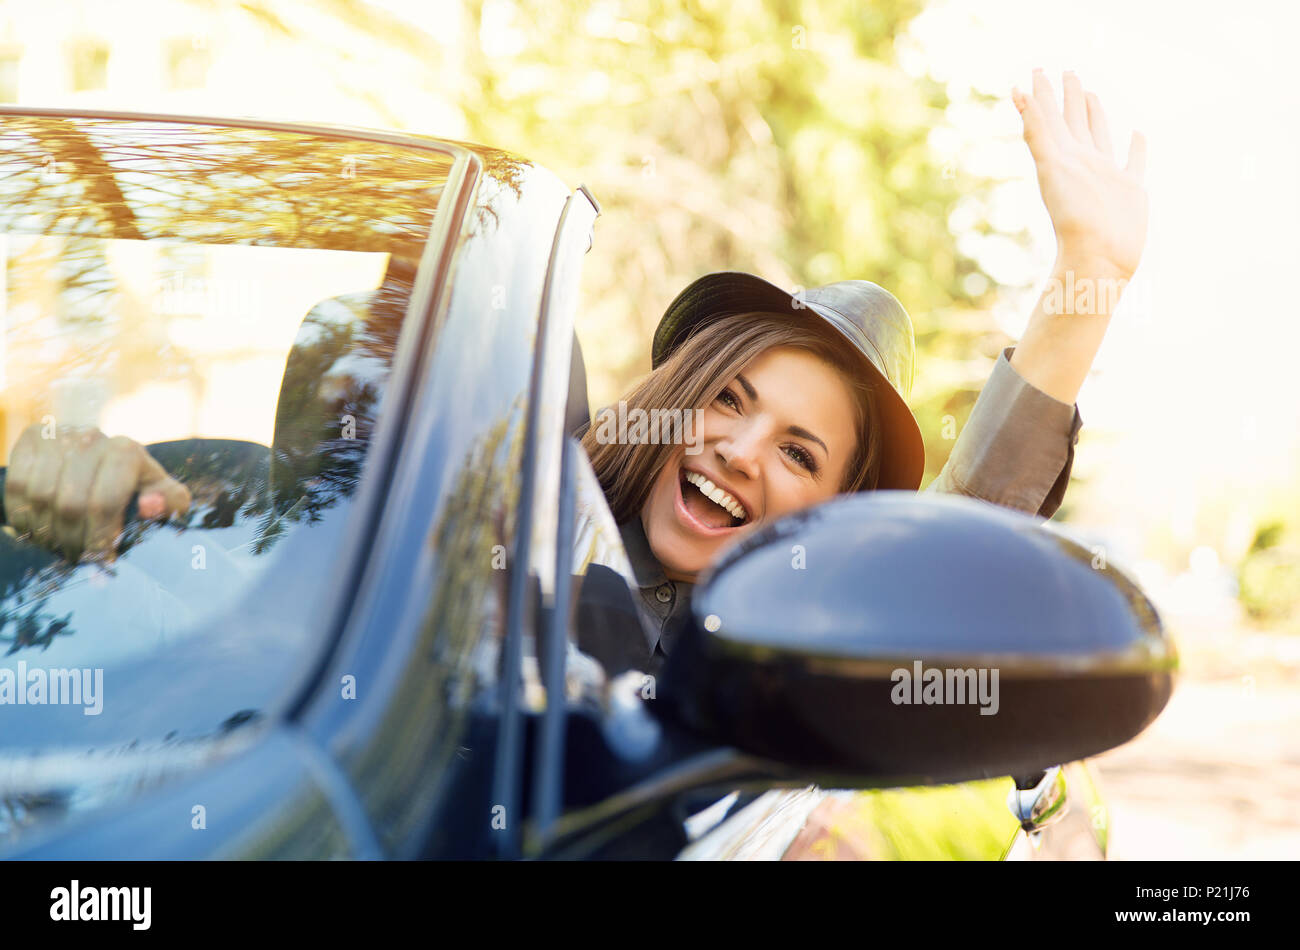 Shot of a young cute woman enjoying a drive in a convertible loving the breeze in her face waving with her arm Stock Photo